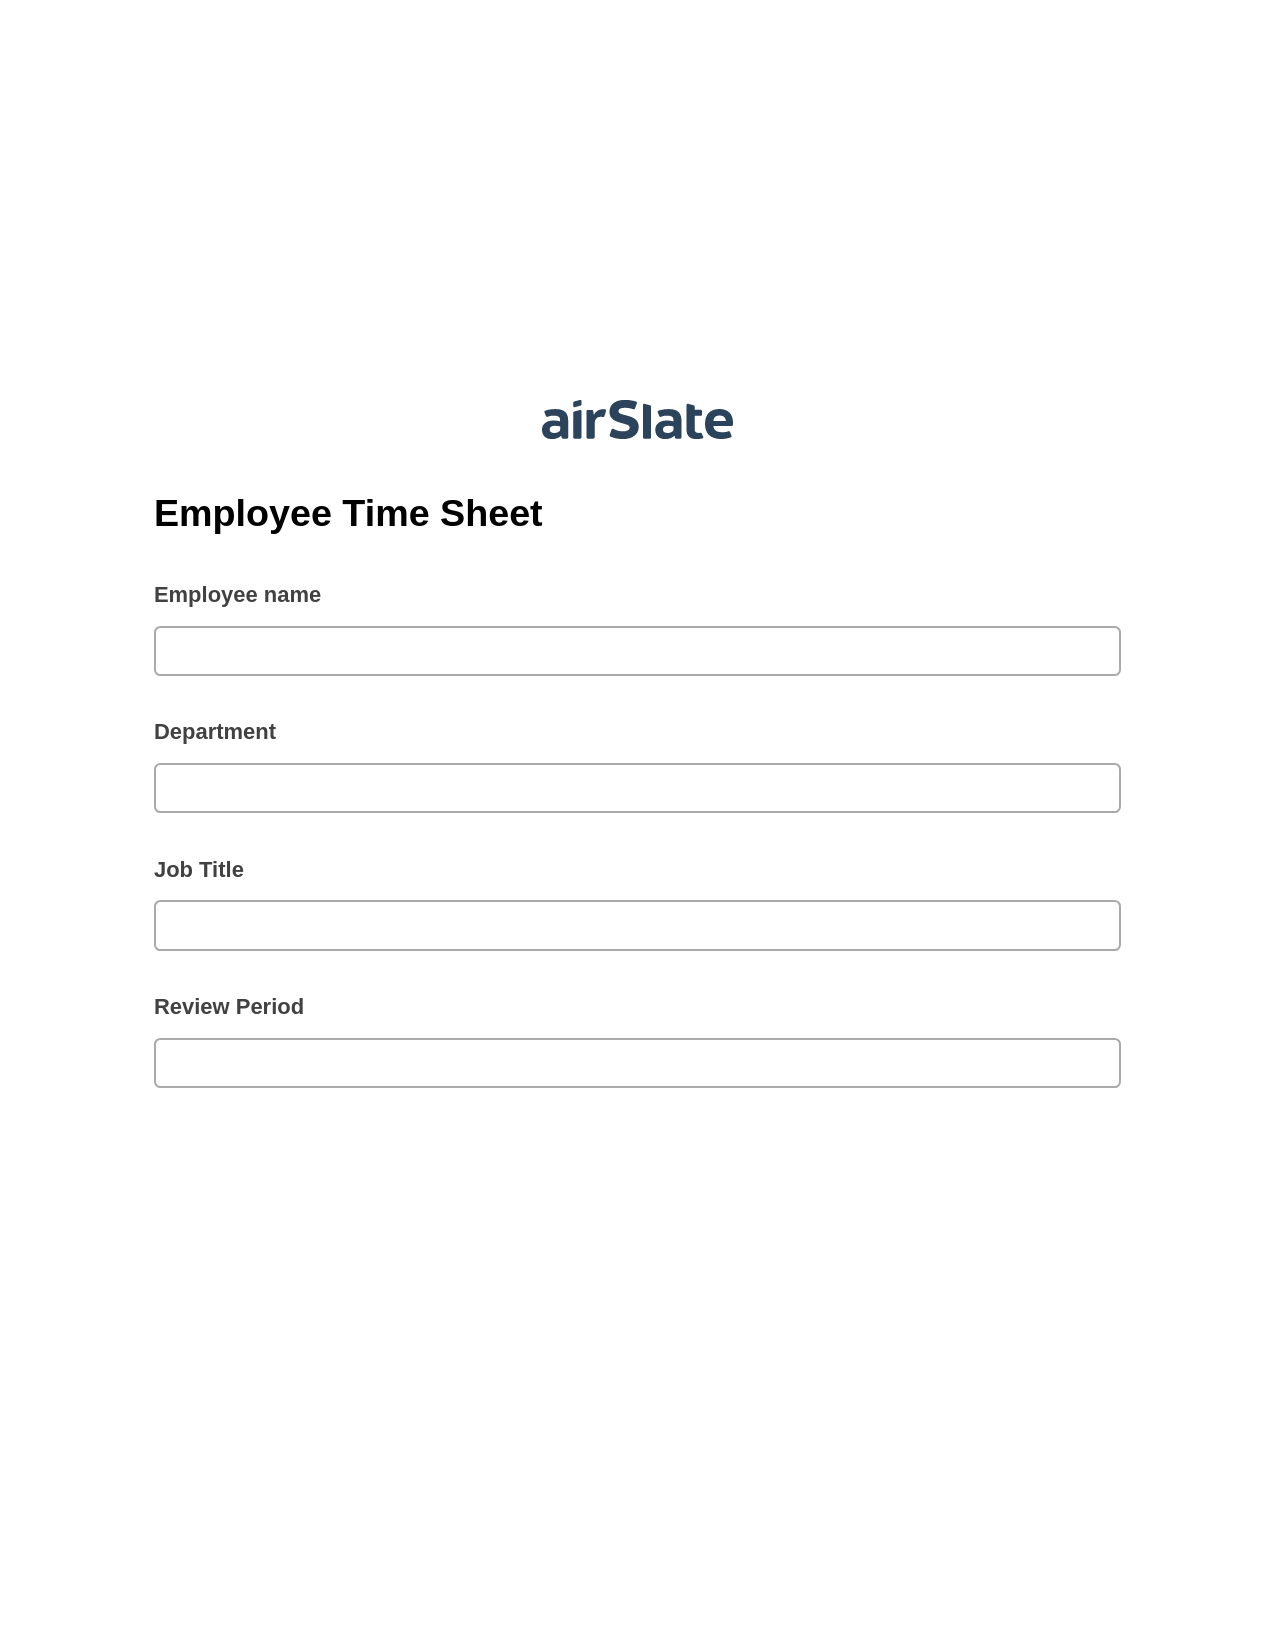 Employee Time Sheet Pre-fill from another Slate Bot, Update Audit Trail Bot, Export to Smartsheet